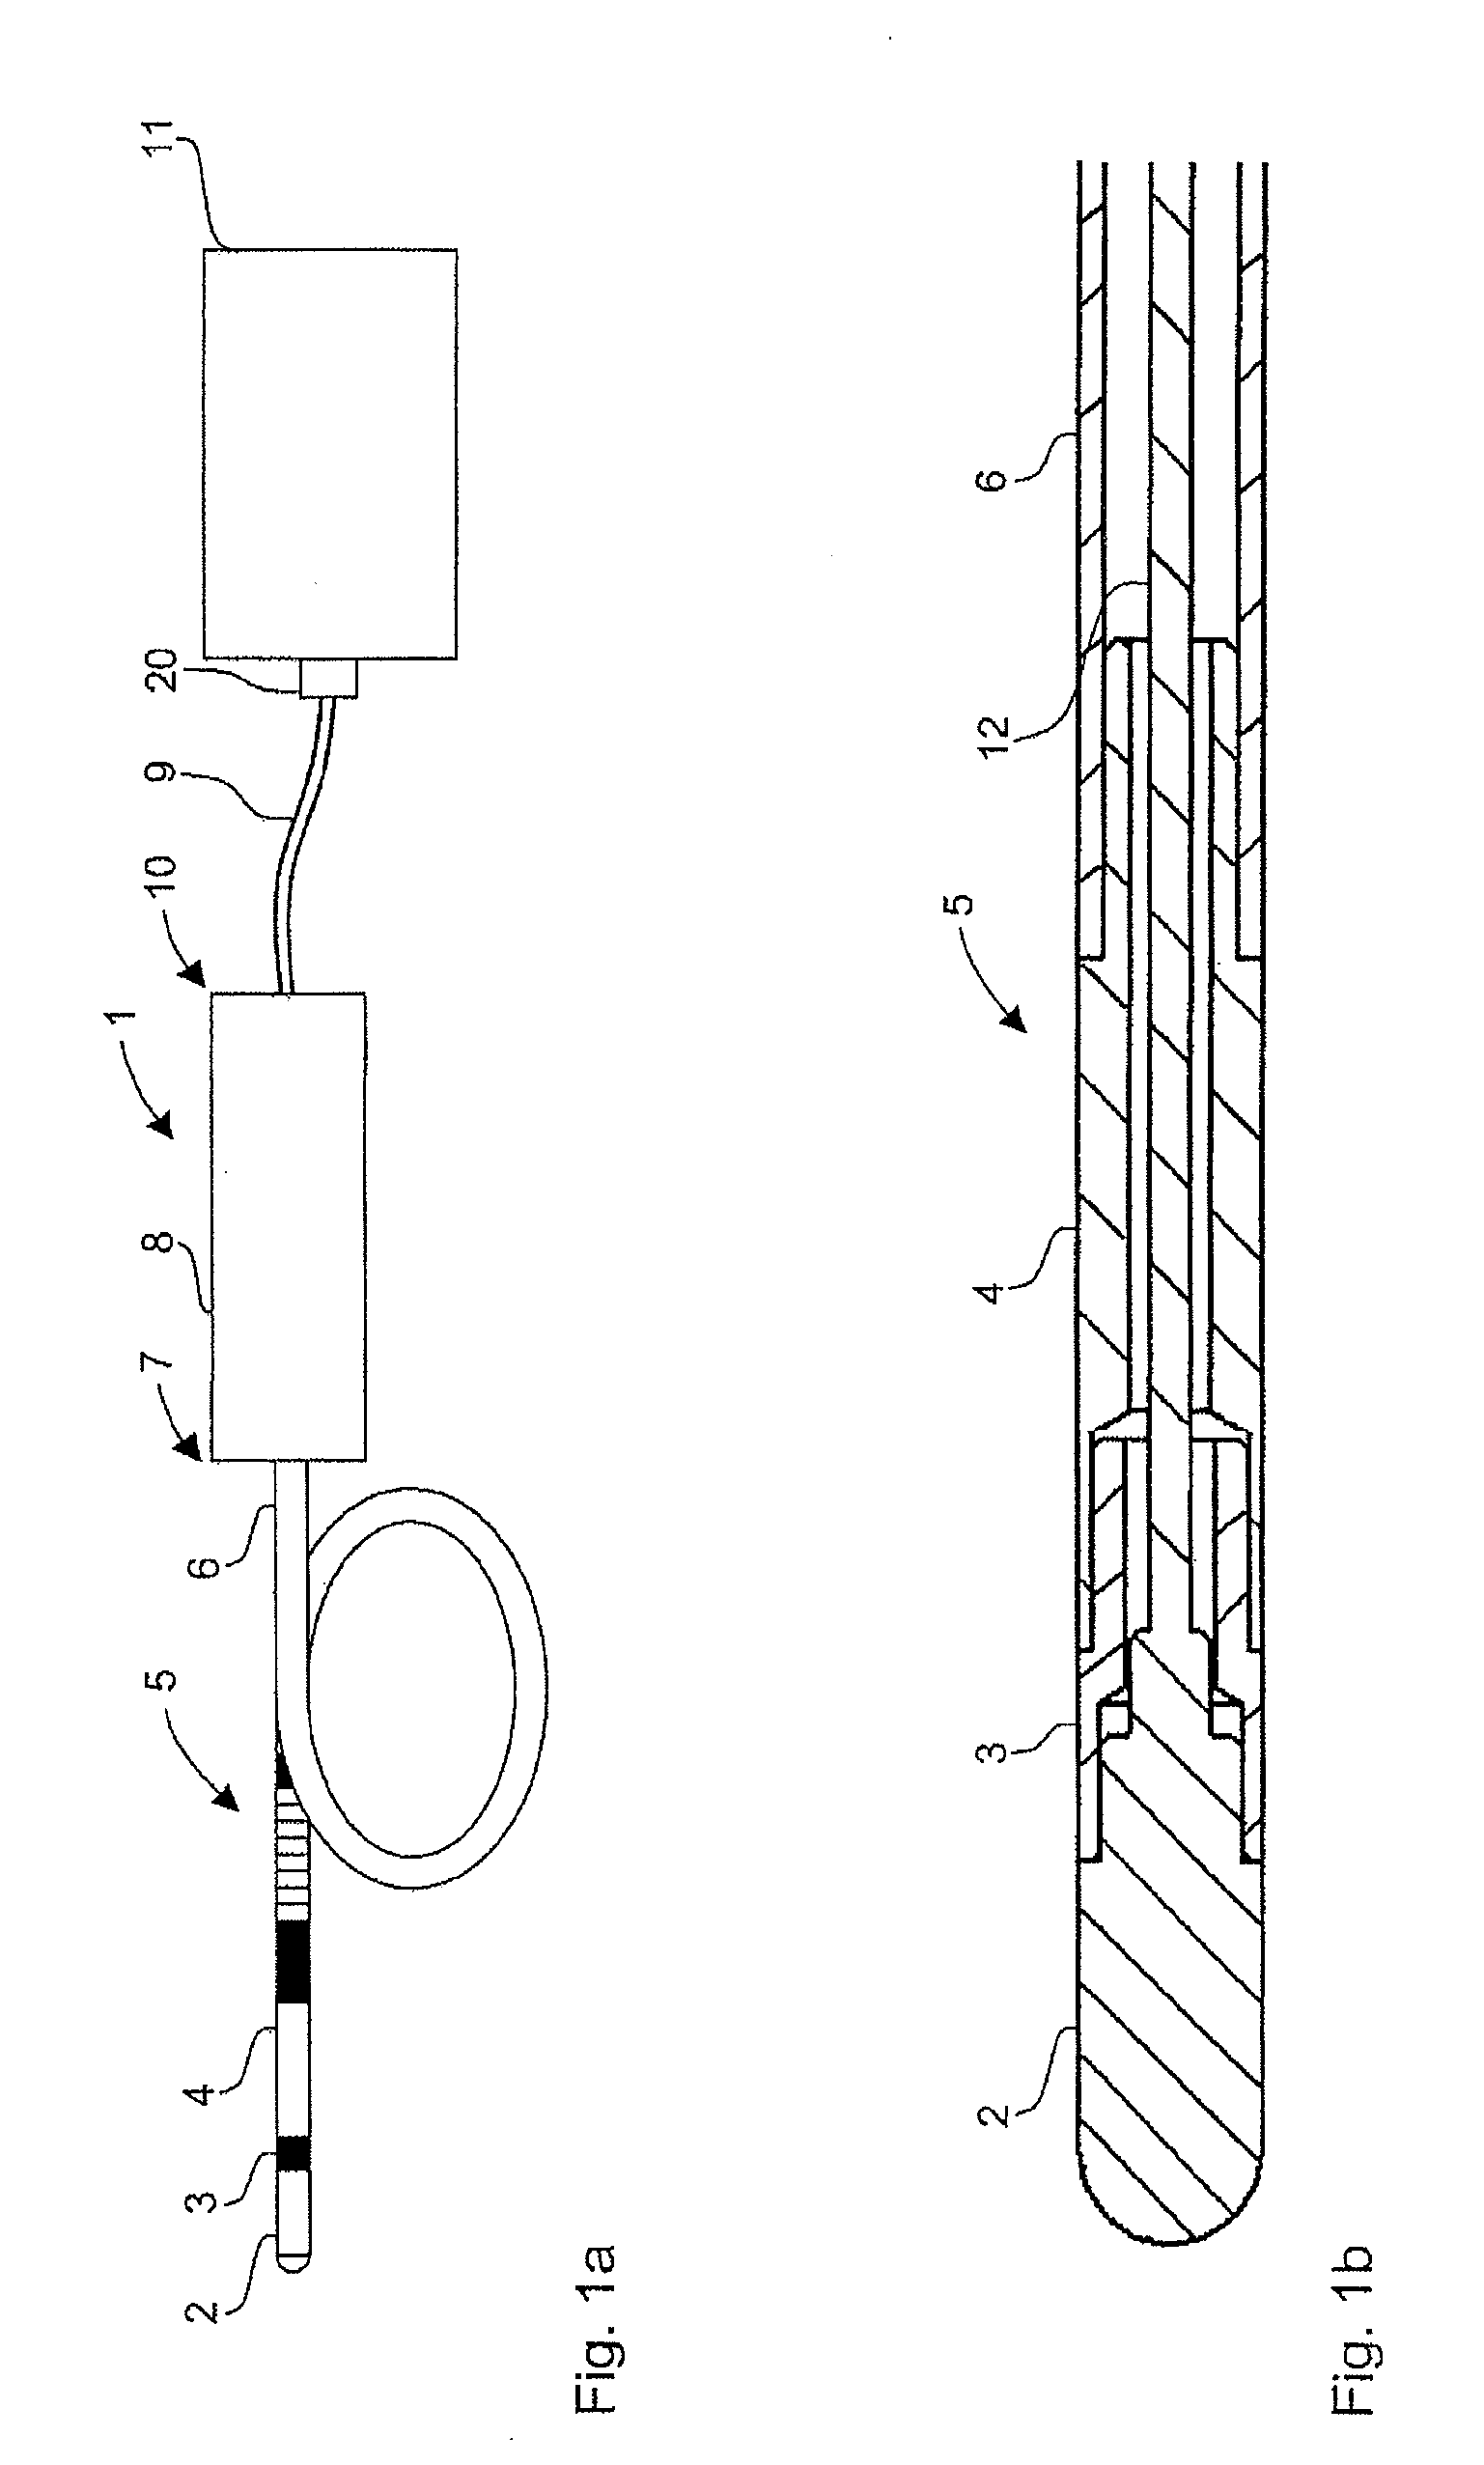 Flexible application device for the high-frequency treatment of biological tissue